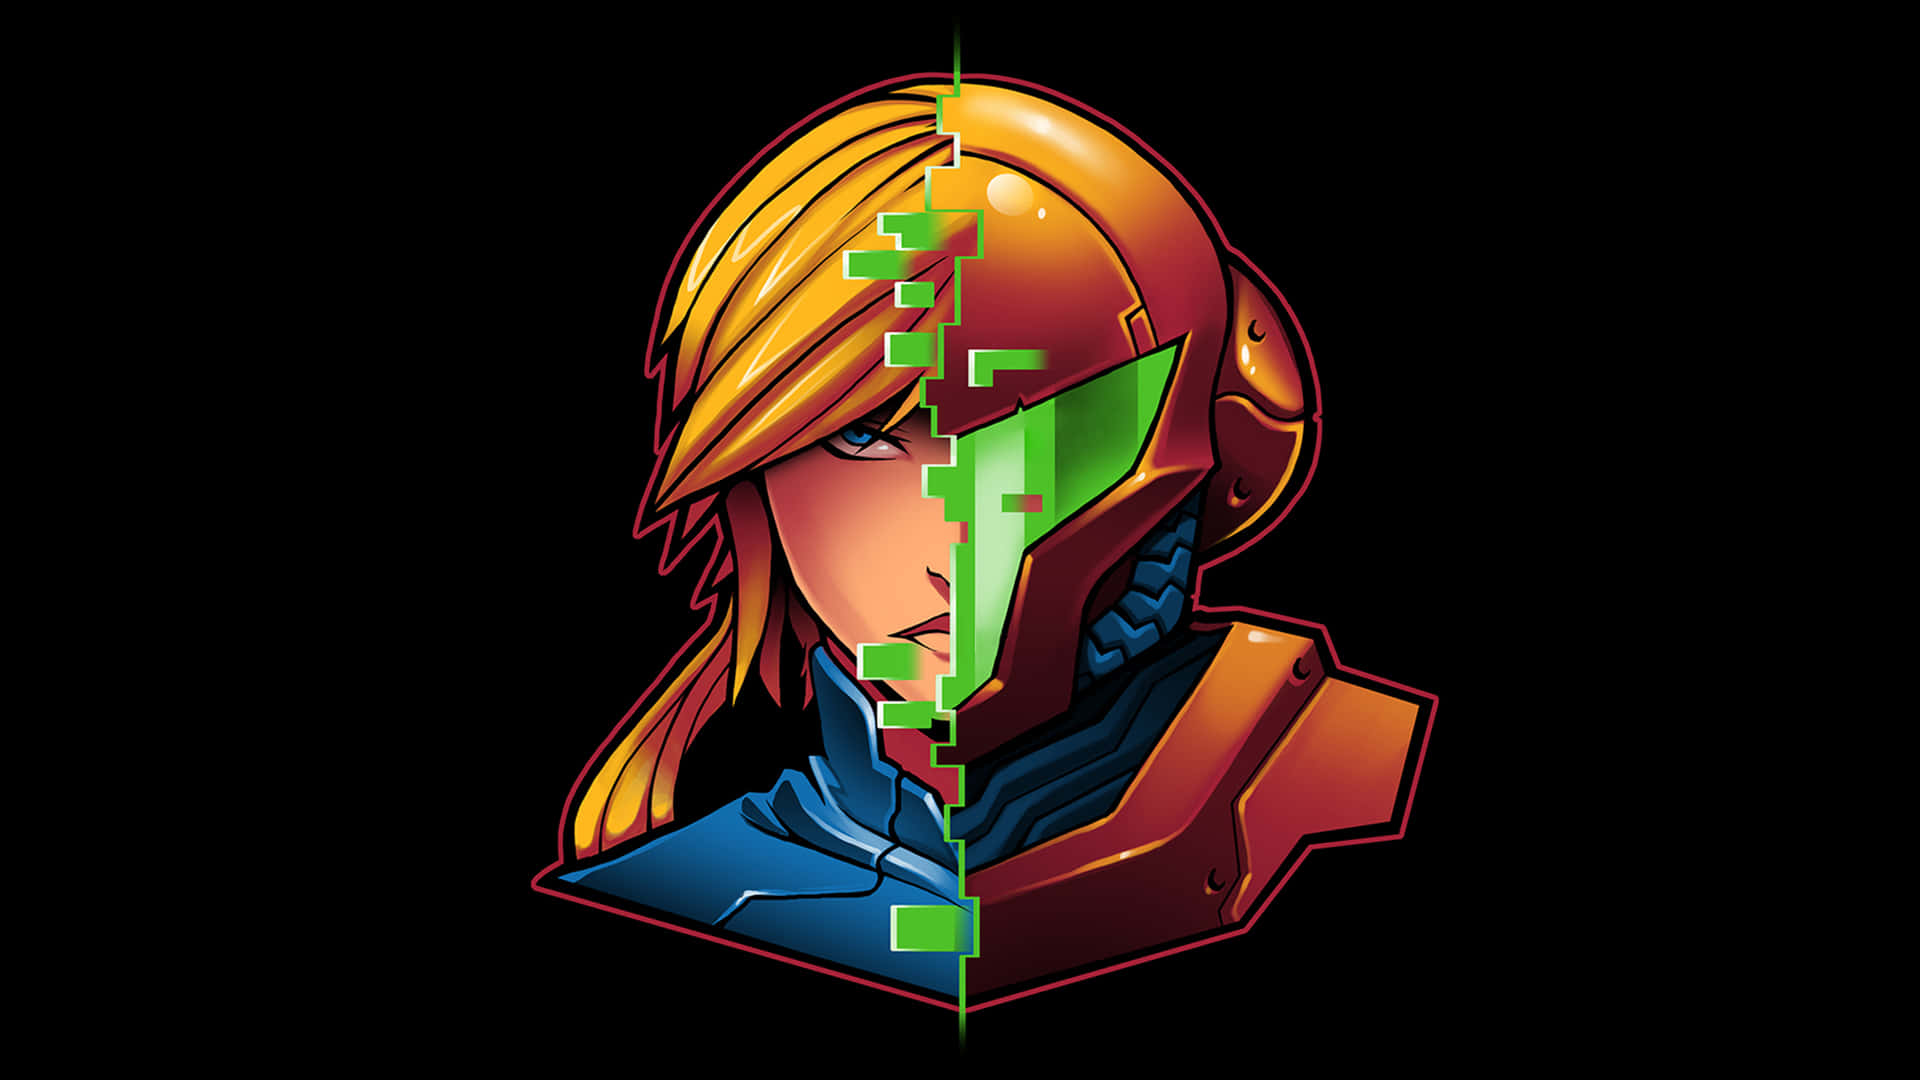 Join Zero Suit Samus in her mission to take down the Space Pirates Wallpaper